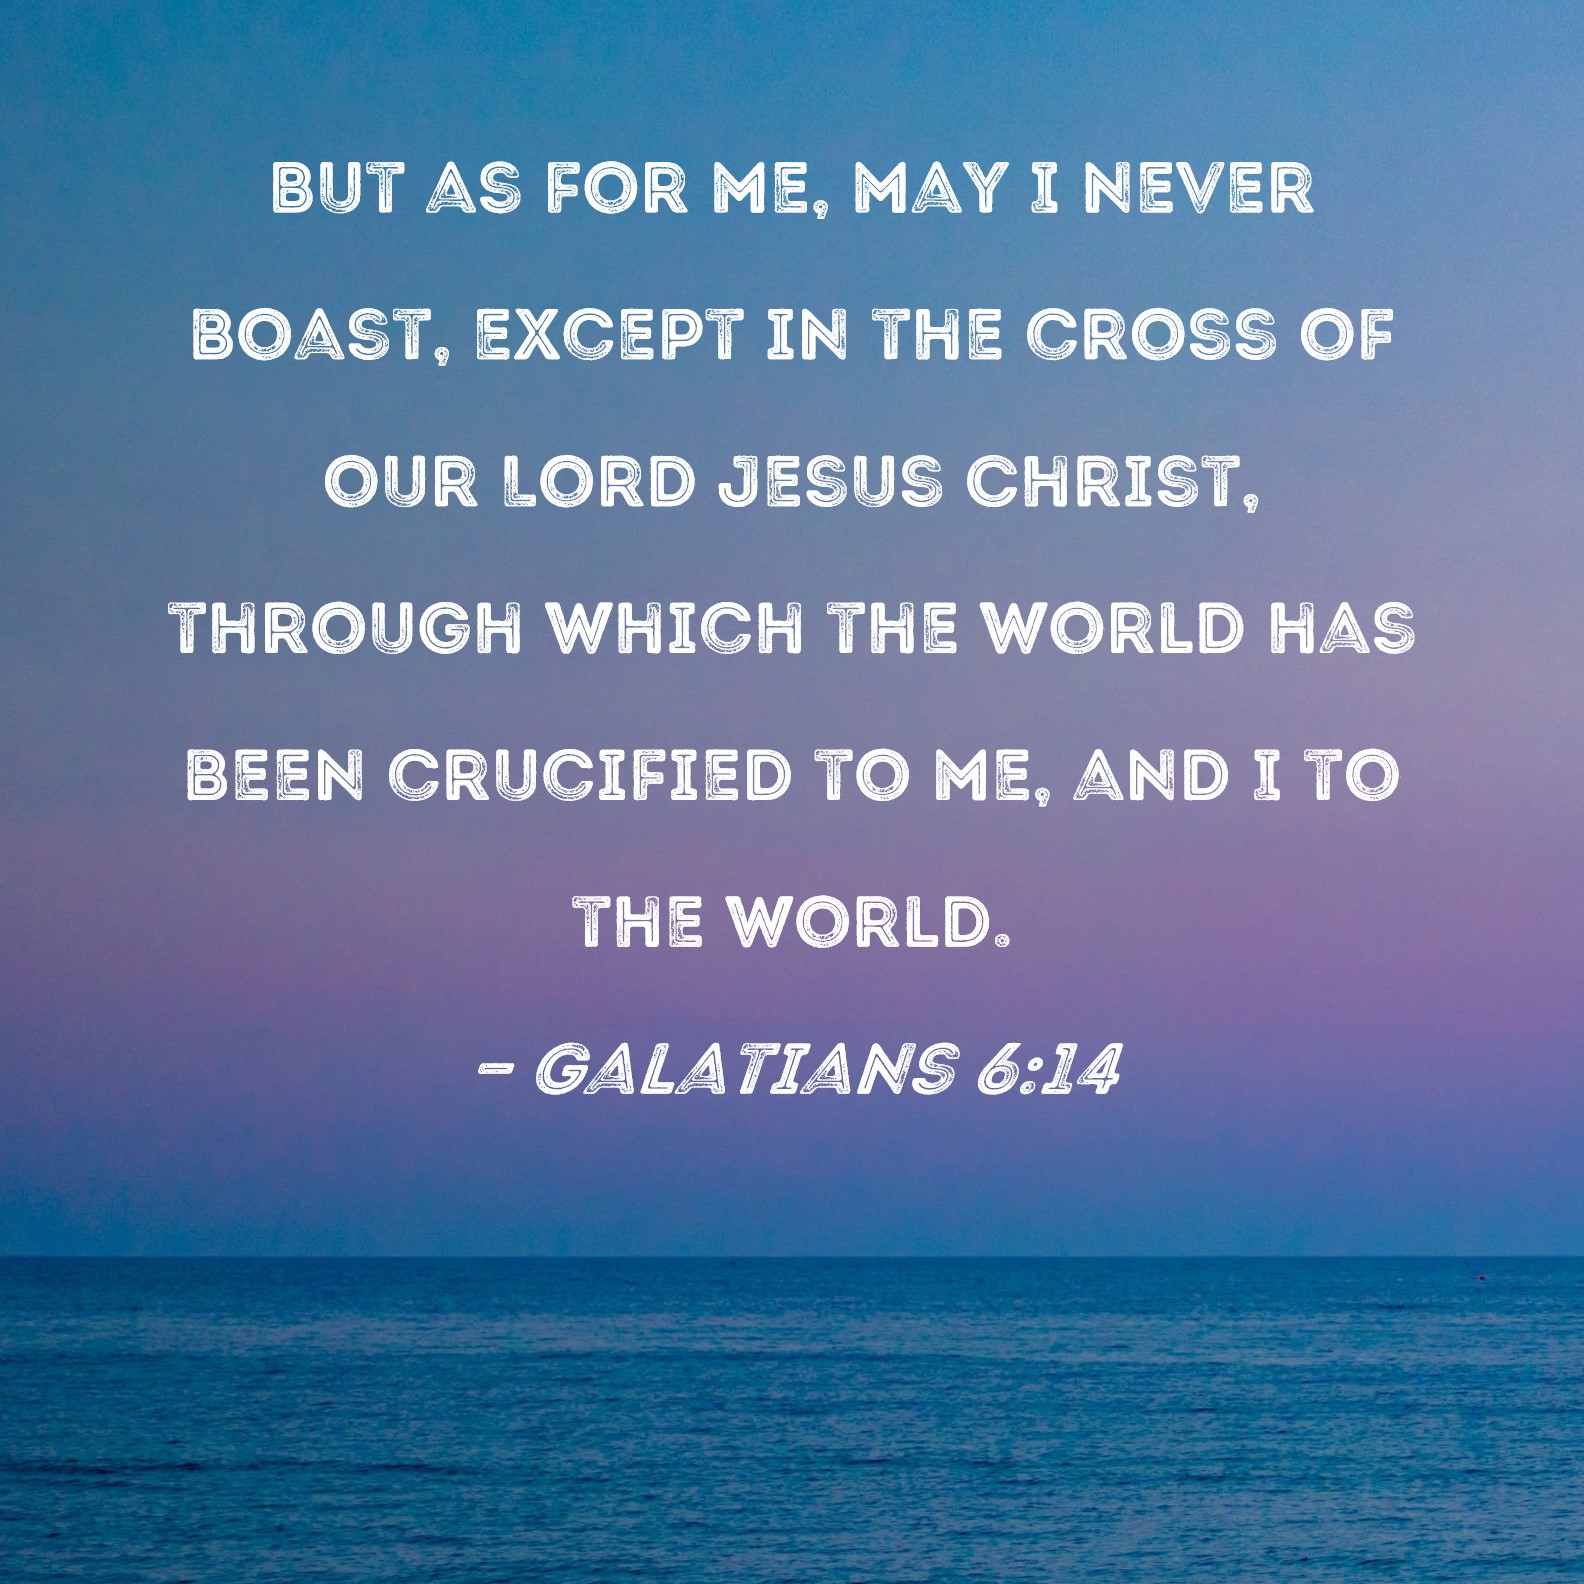 Galatians 6:14 But as for me, may I never boast, except in the cross of our  Lord Jesus Christ, through which the world has been crucified to me, and I  to the